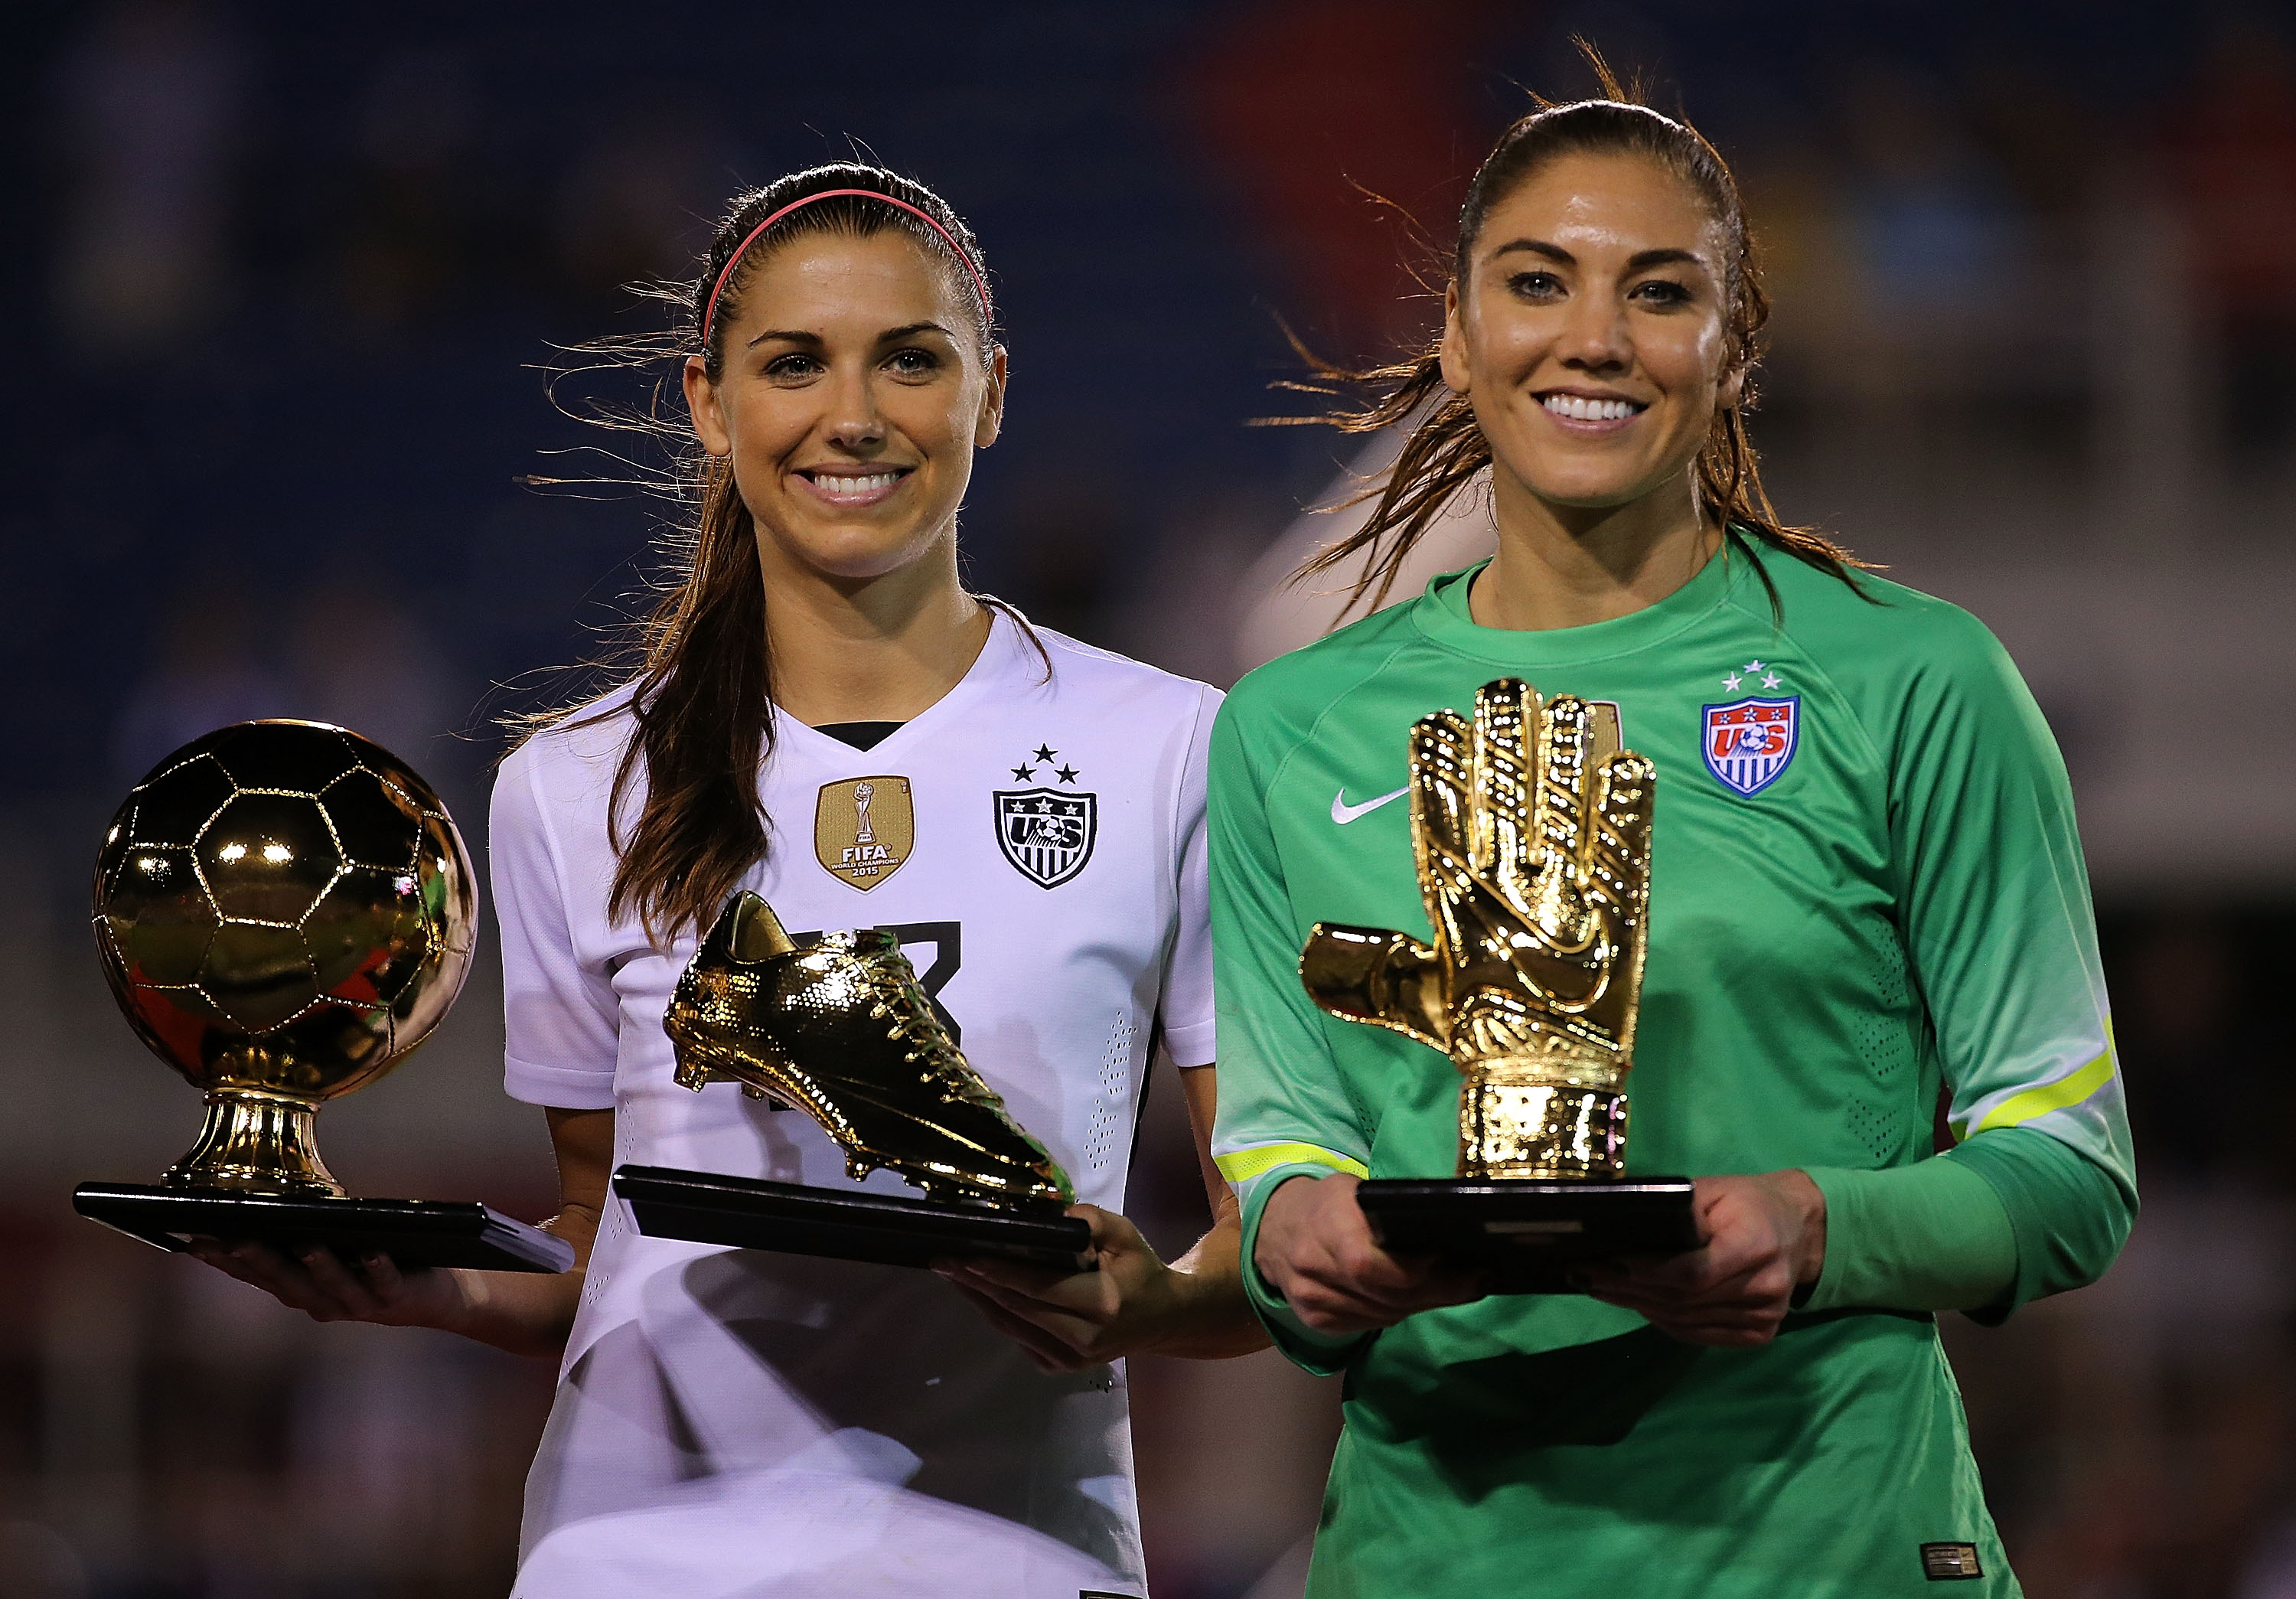 Alex Morgan and Hope Solo by ElSexteteFCB on DeviantArt3000 x 2089